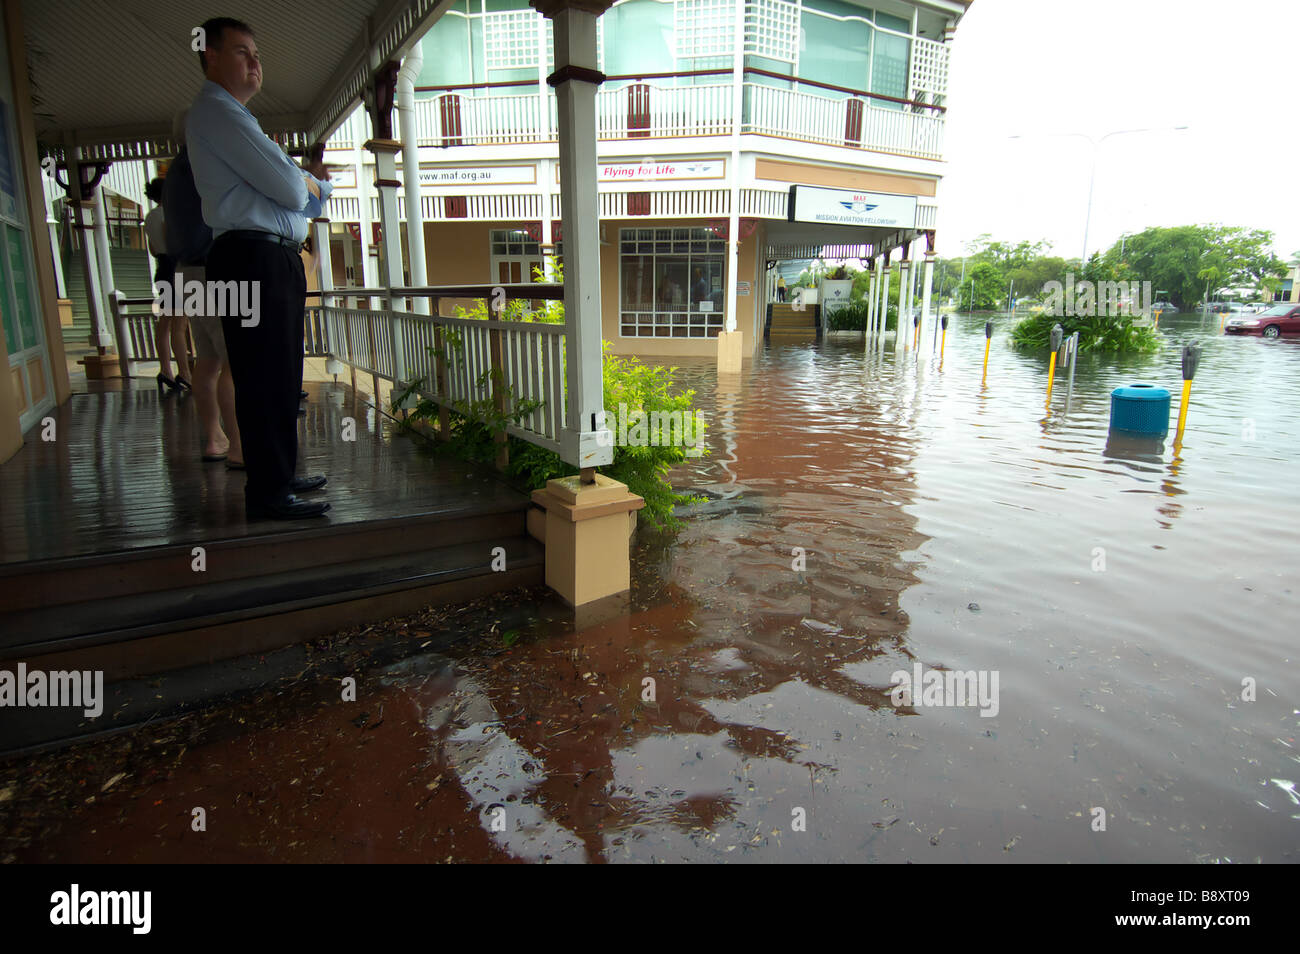 Business grinds to a halt with flooding in the Cairns CBD, Queensland, Australia Stock Photo